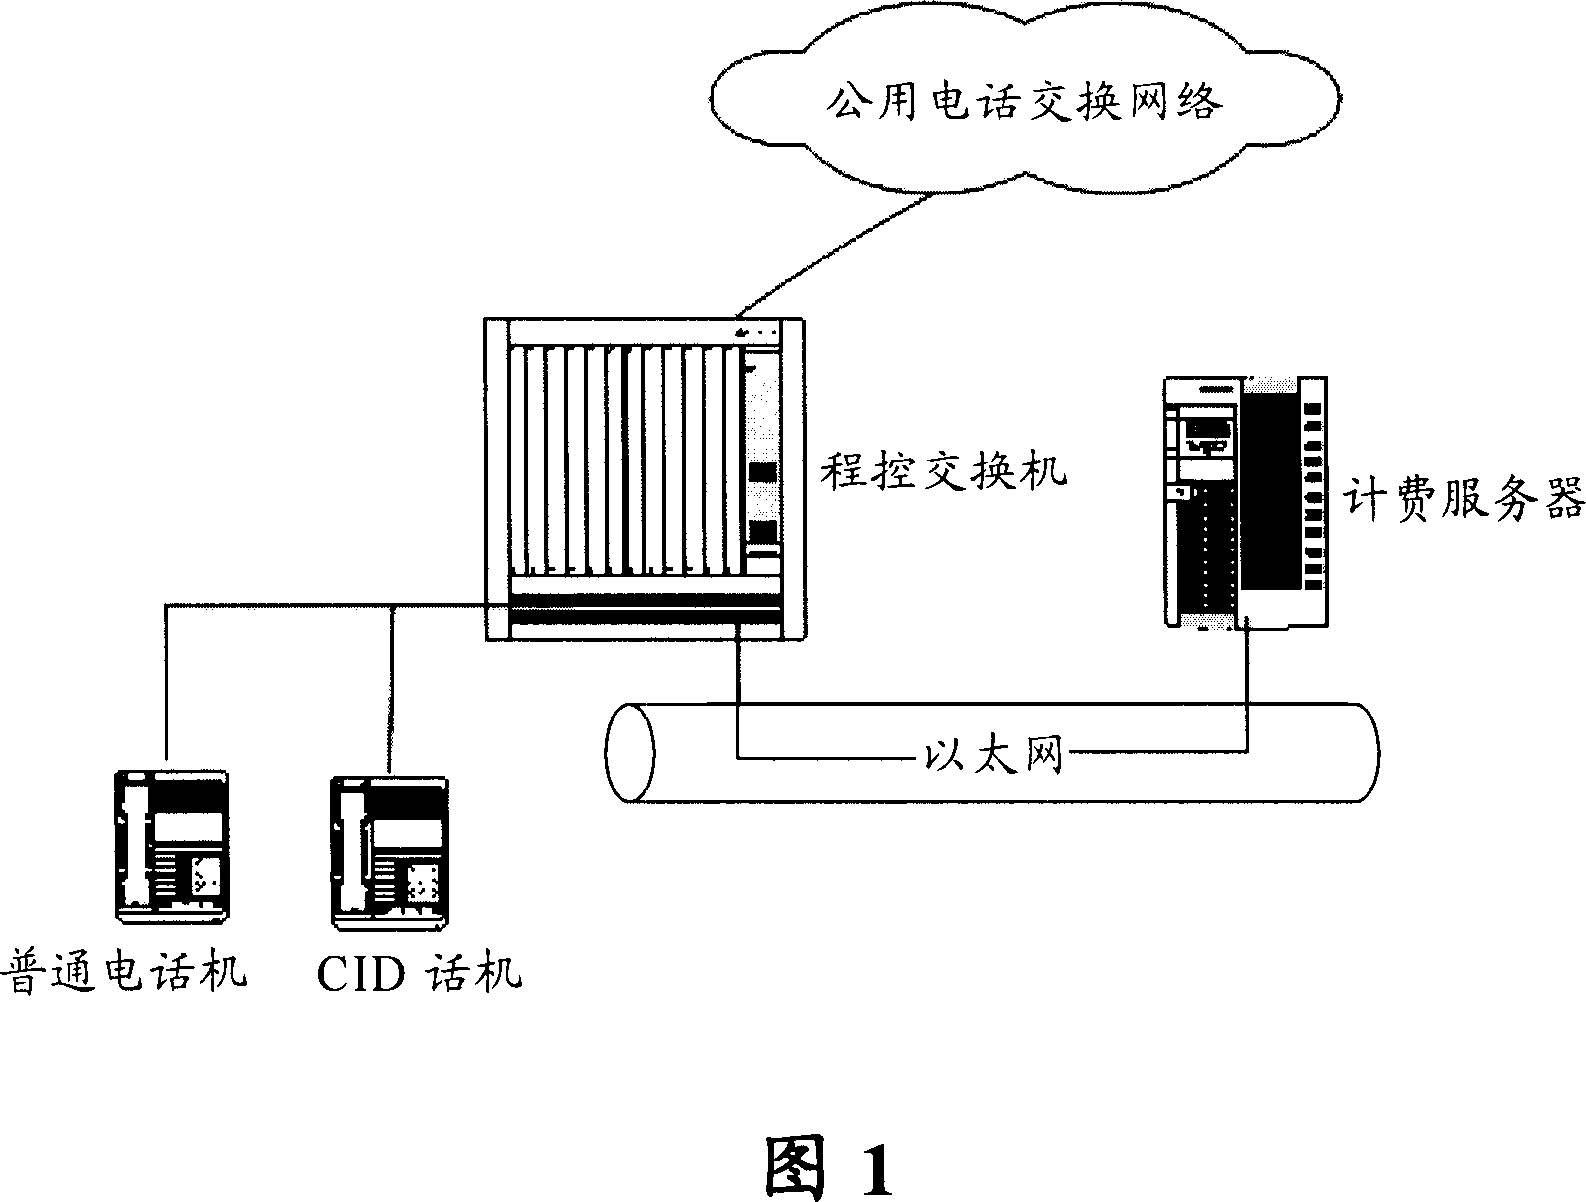 Method and system for implementing instant service for telephone fees for terminal users